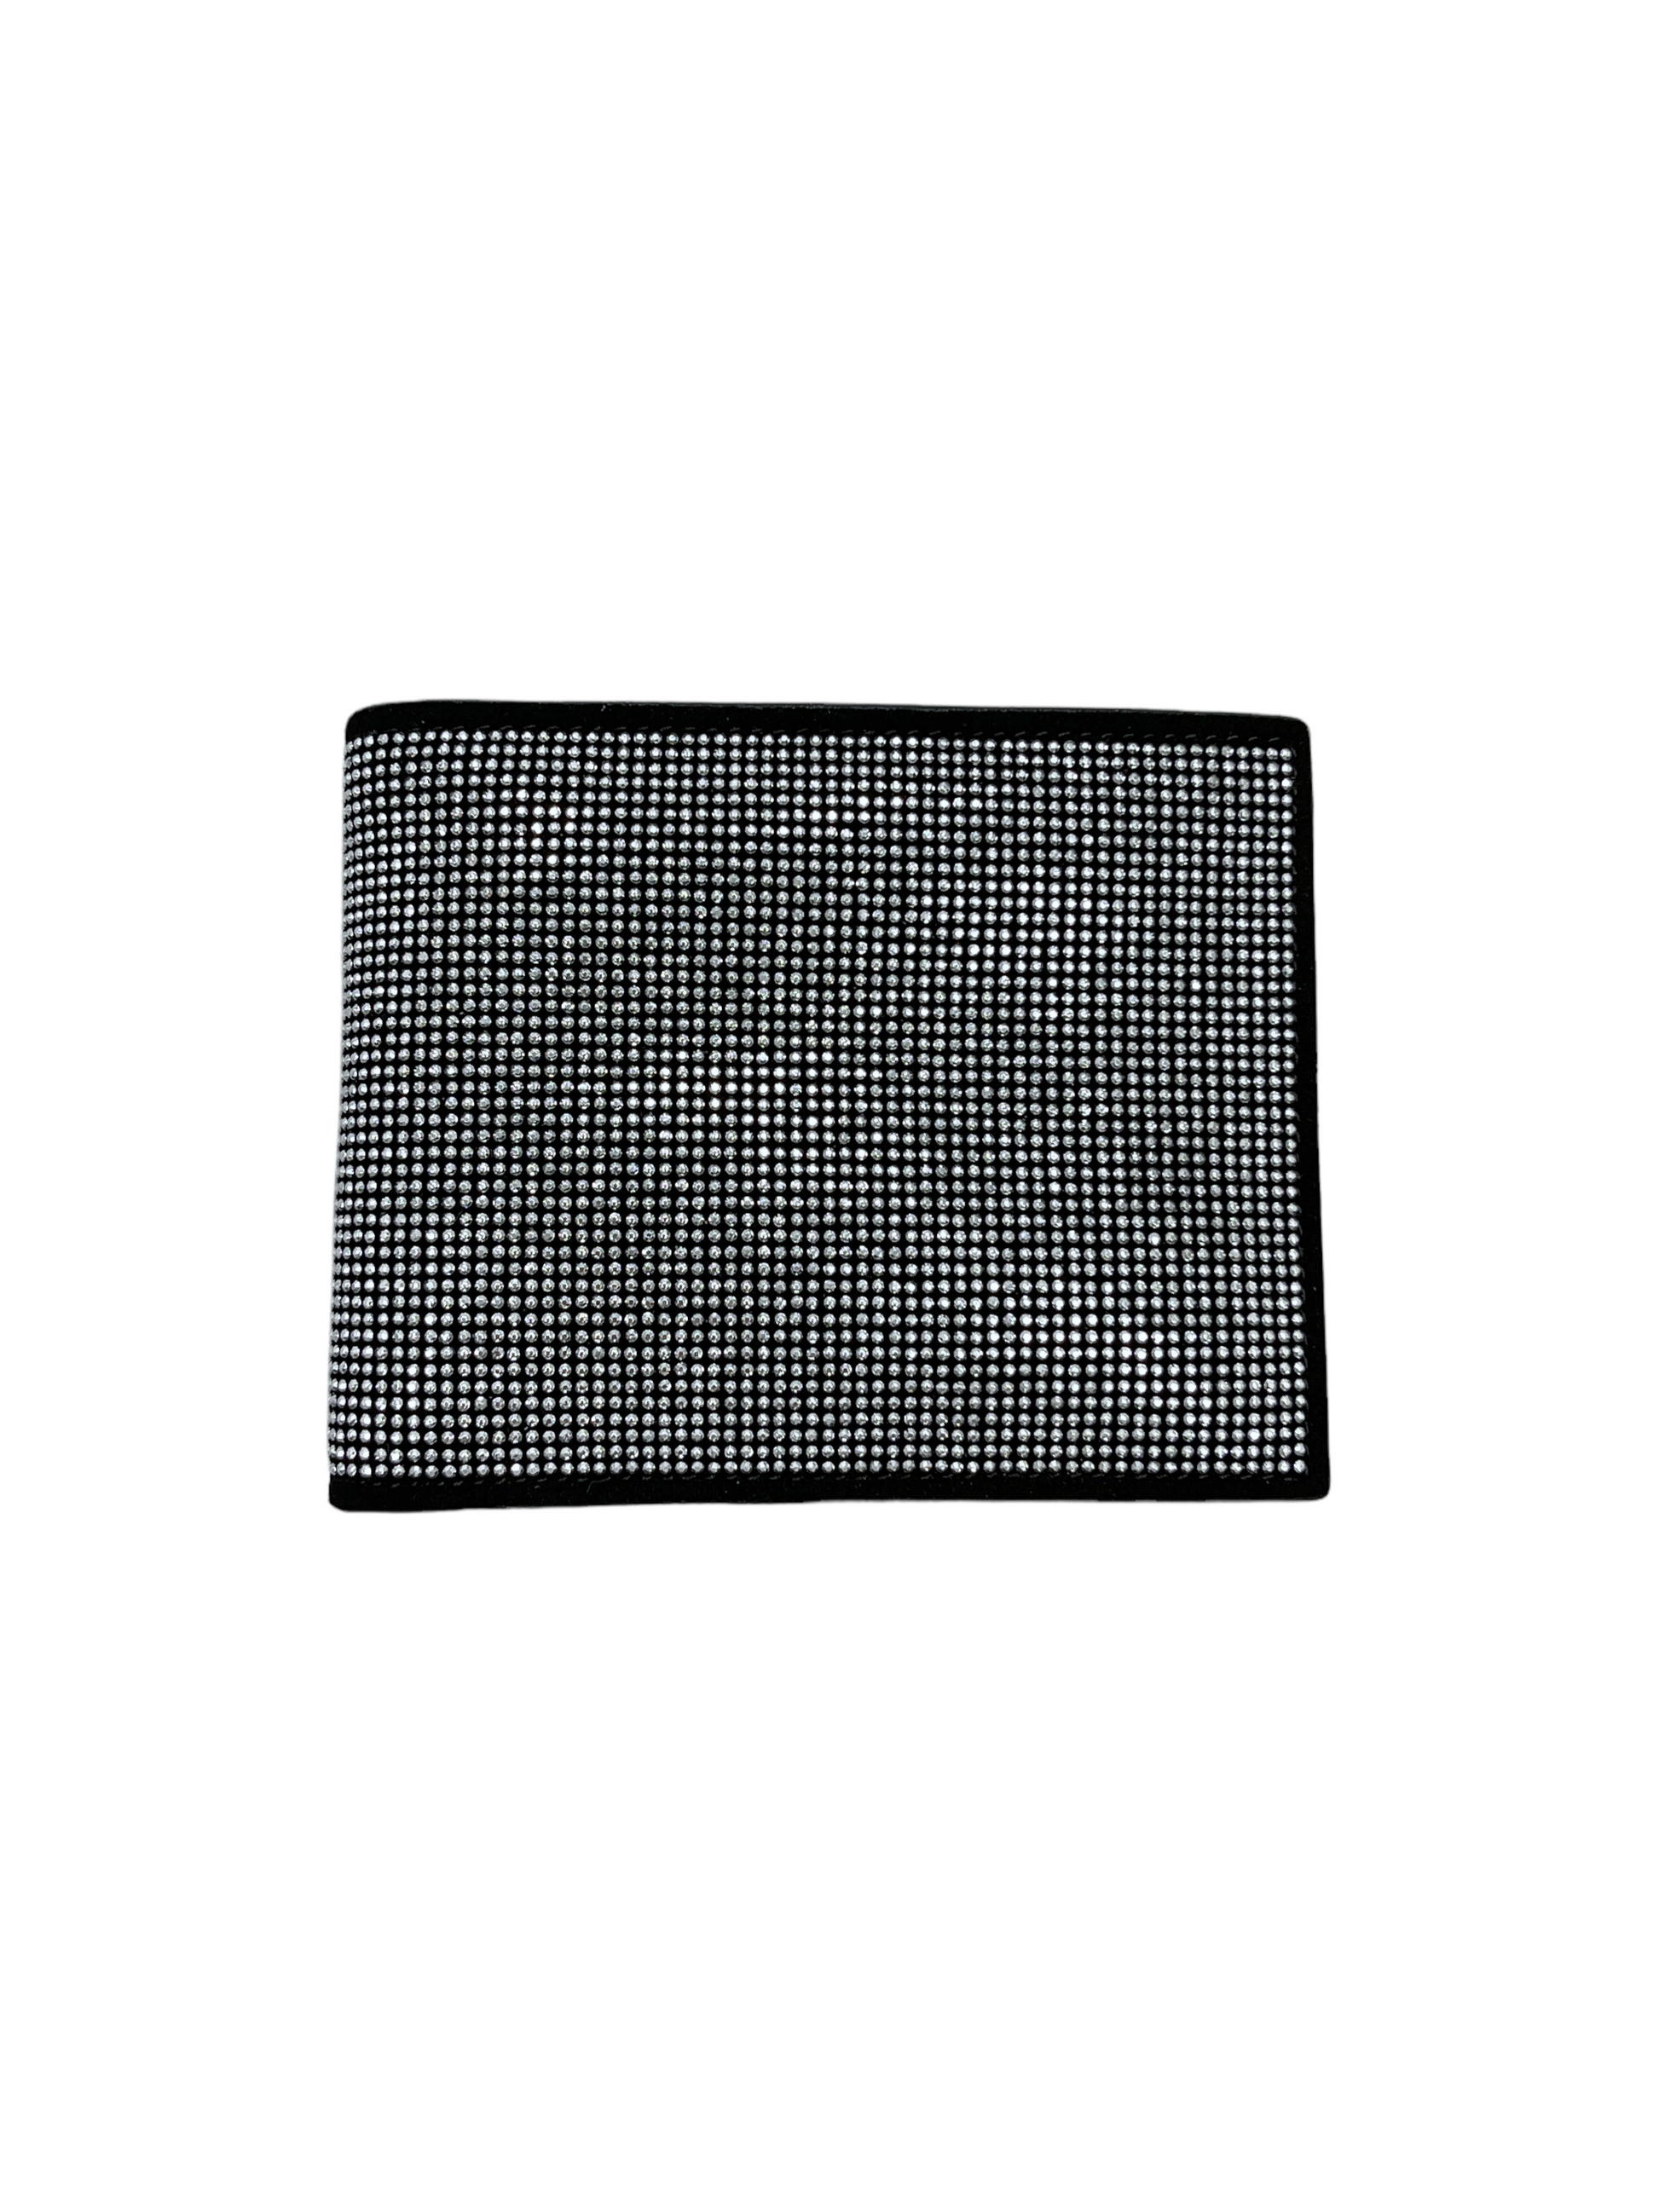 Guiseppe Zanotti Black Leather Crystal Encrusted Bi-Fold Wallet - Genuine Design luxury consignment Calgary, Alberta, Canada New and pre-owned clothing, shoes, accessories.